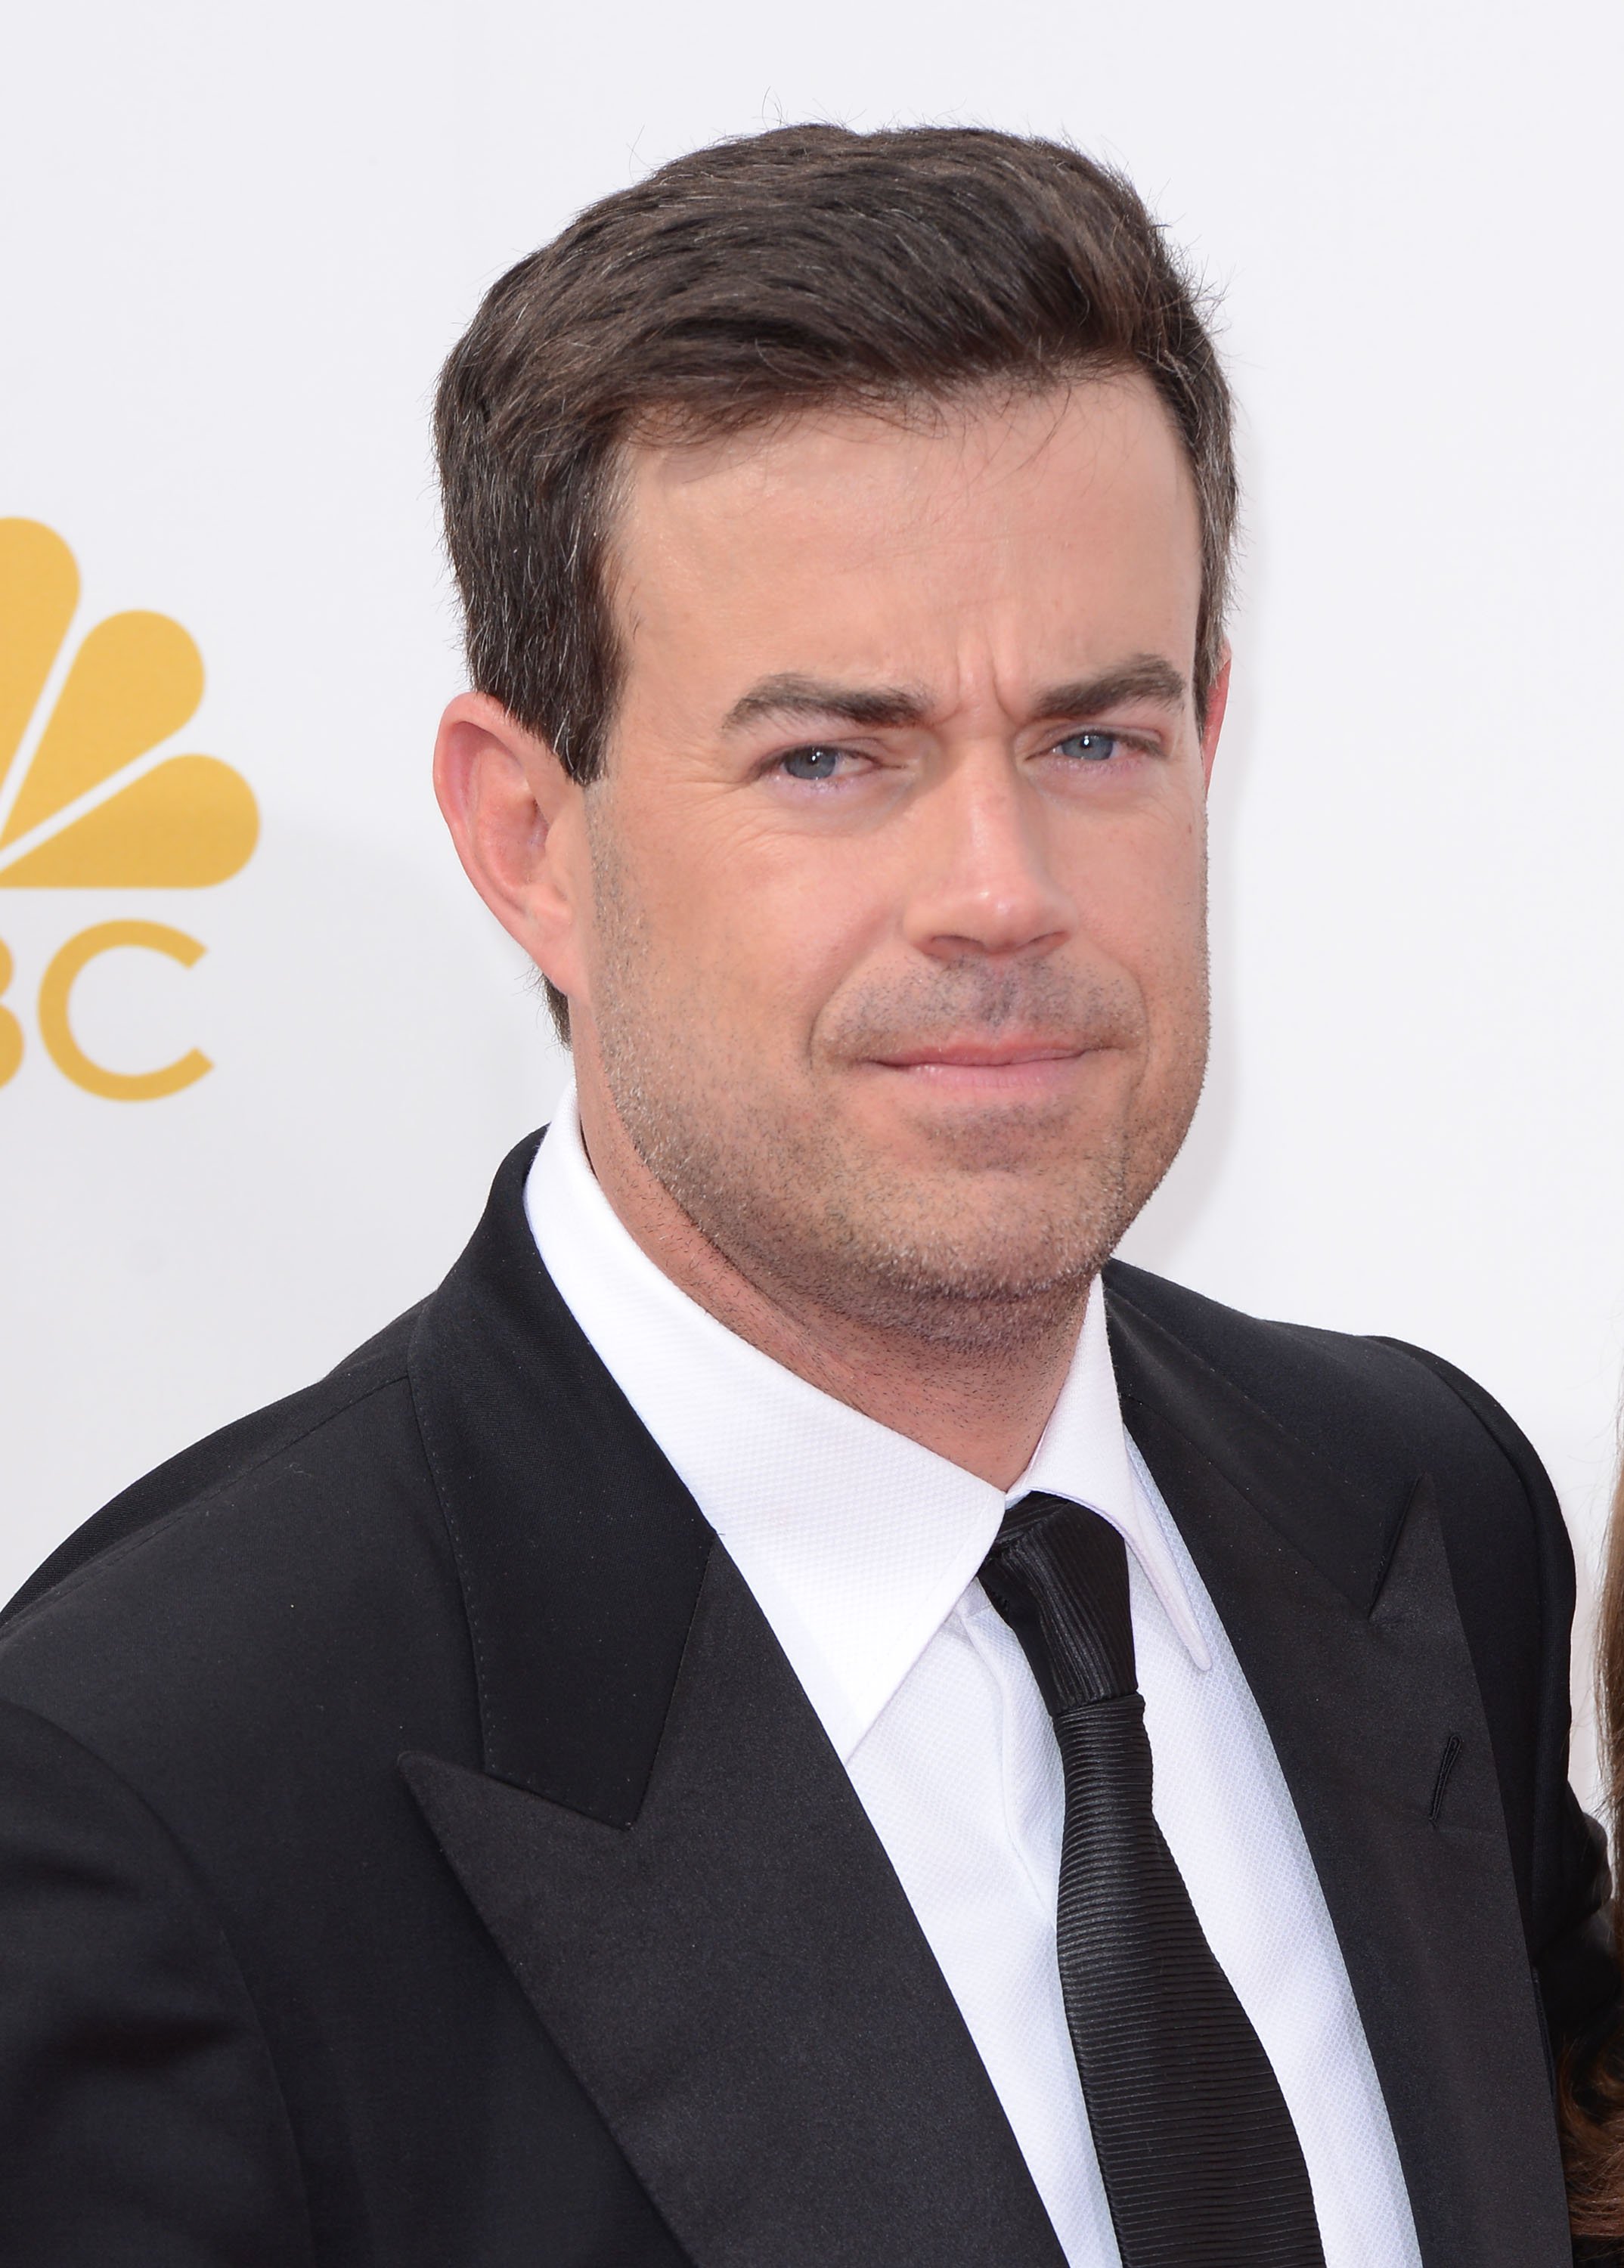 Carson Daly attends the 66th Annual Primetime Emmy Awards in Los Angeles, California on August 25, 2014 | Photo: Getty Images